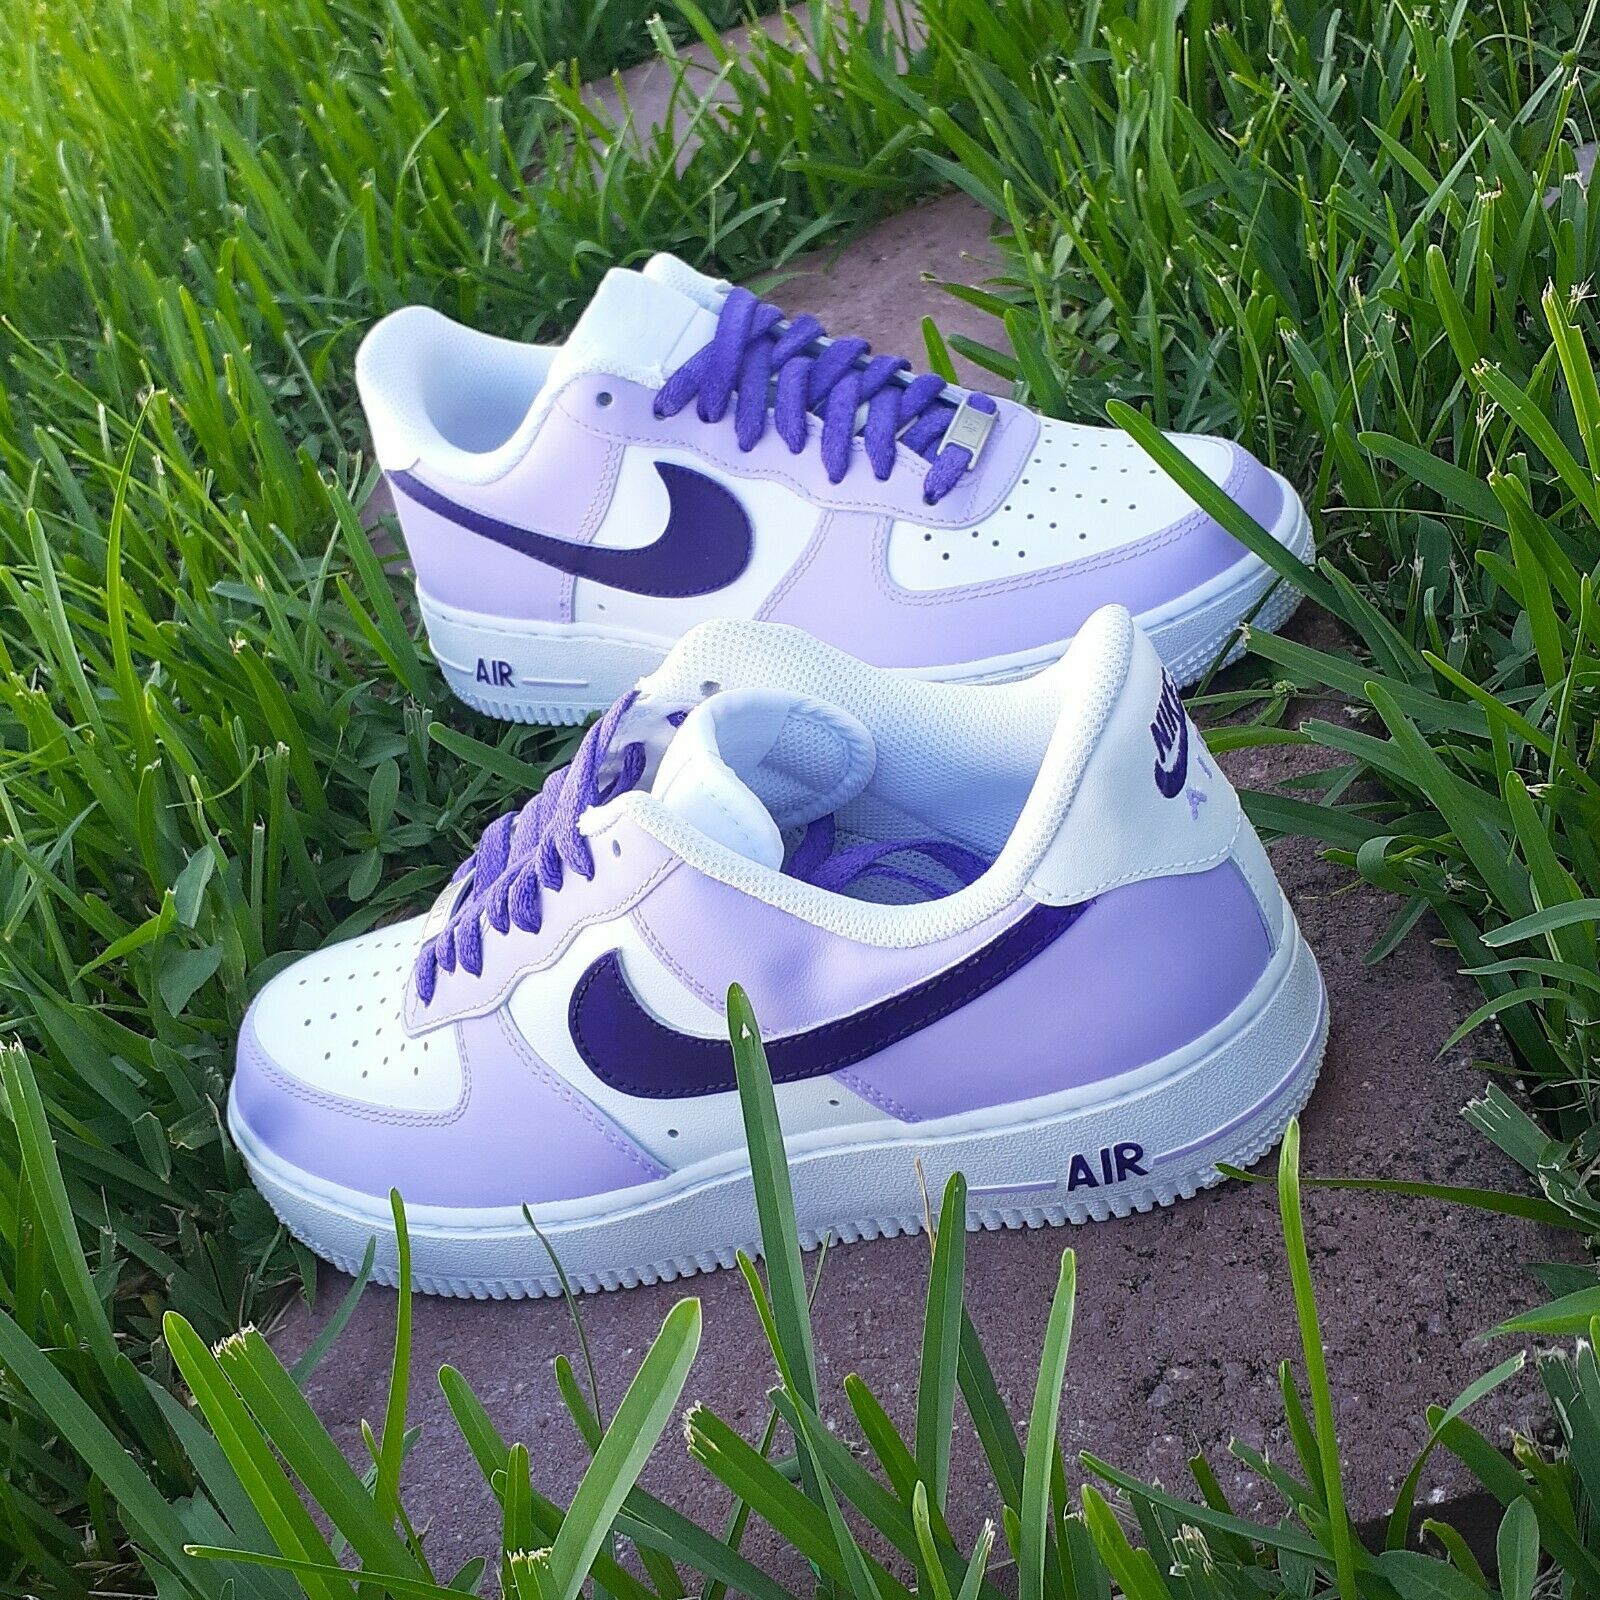 Air Force 1 Custom Low Ultraviolet UV Two Tone Light & Dark Purple Laces Low Shoes All Sizes AF1 Sneakers